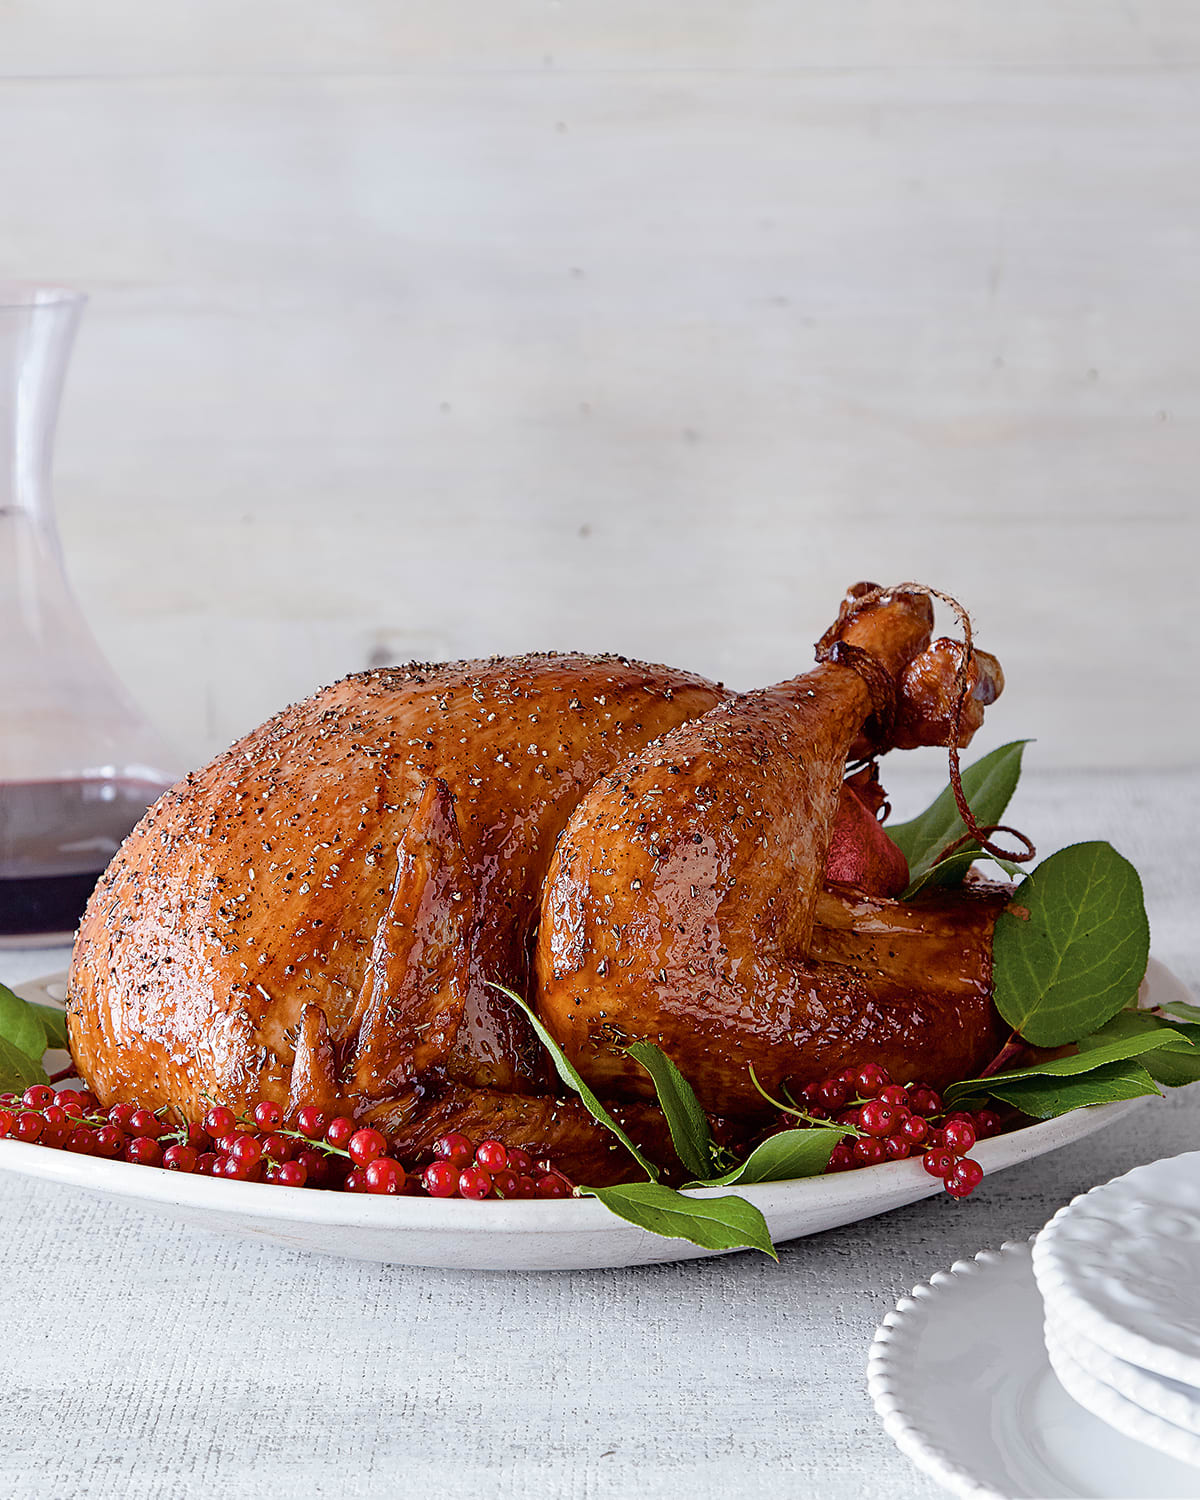 Wood-Smoked, Nitrate-Free Turkey, For 16-18 People